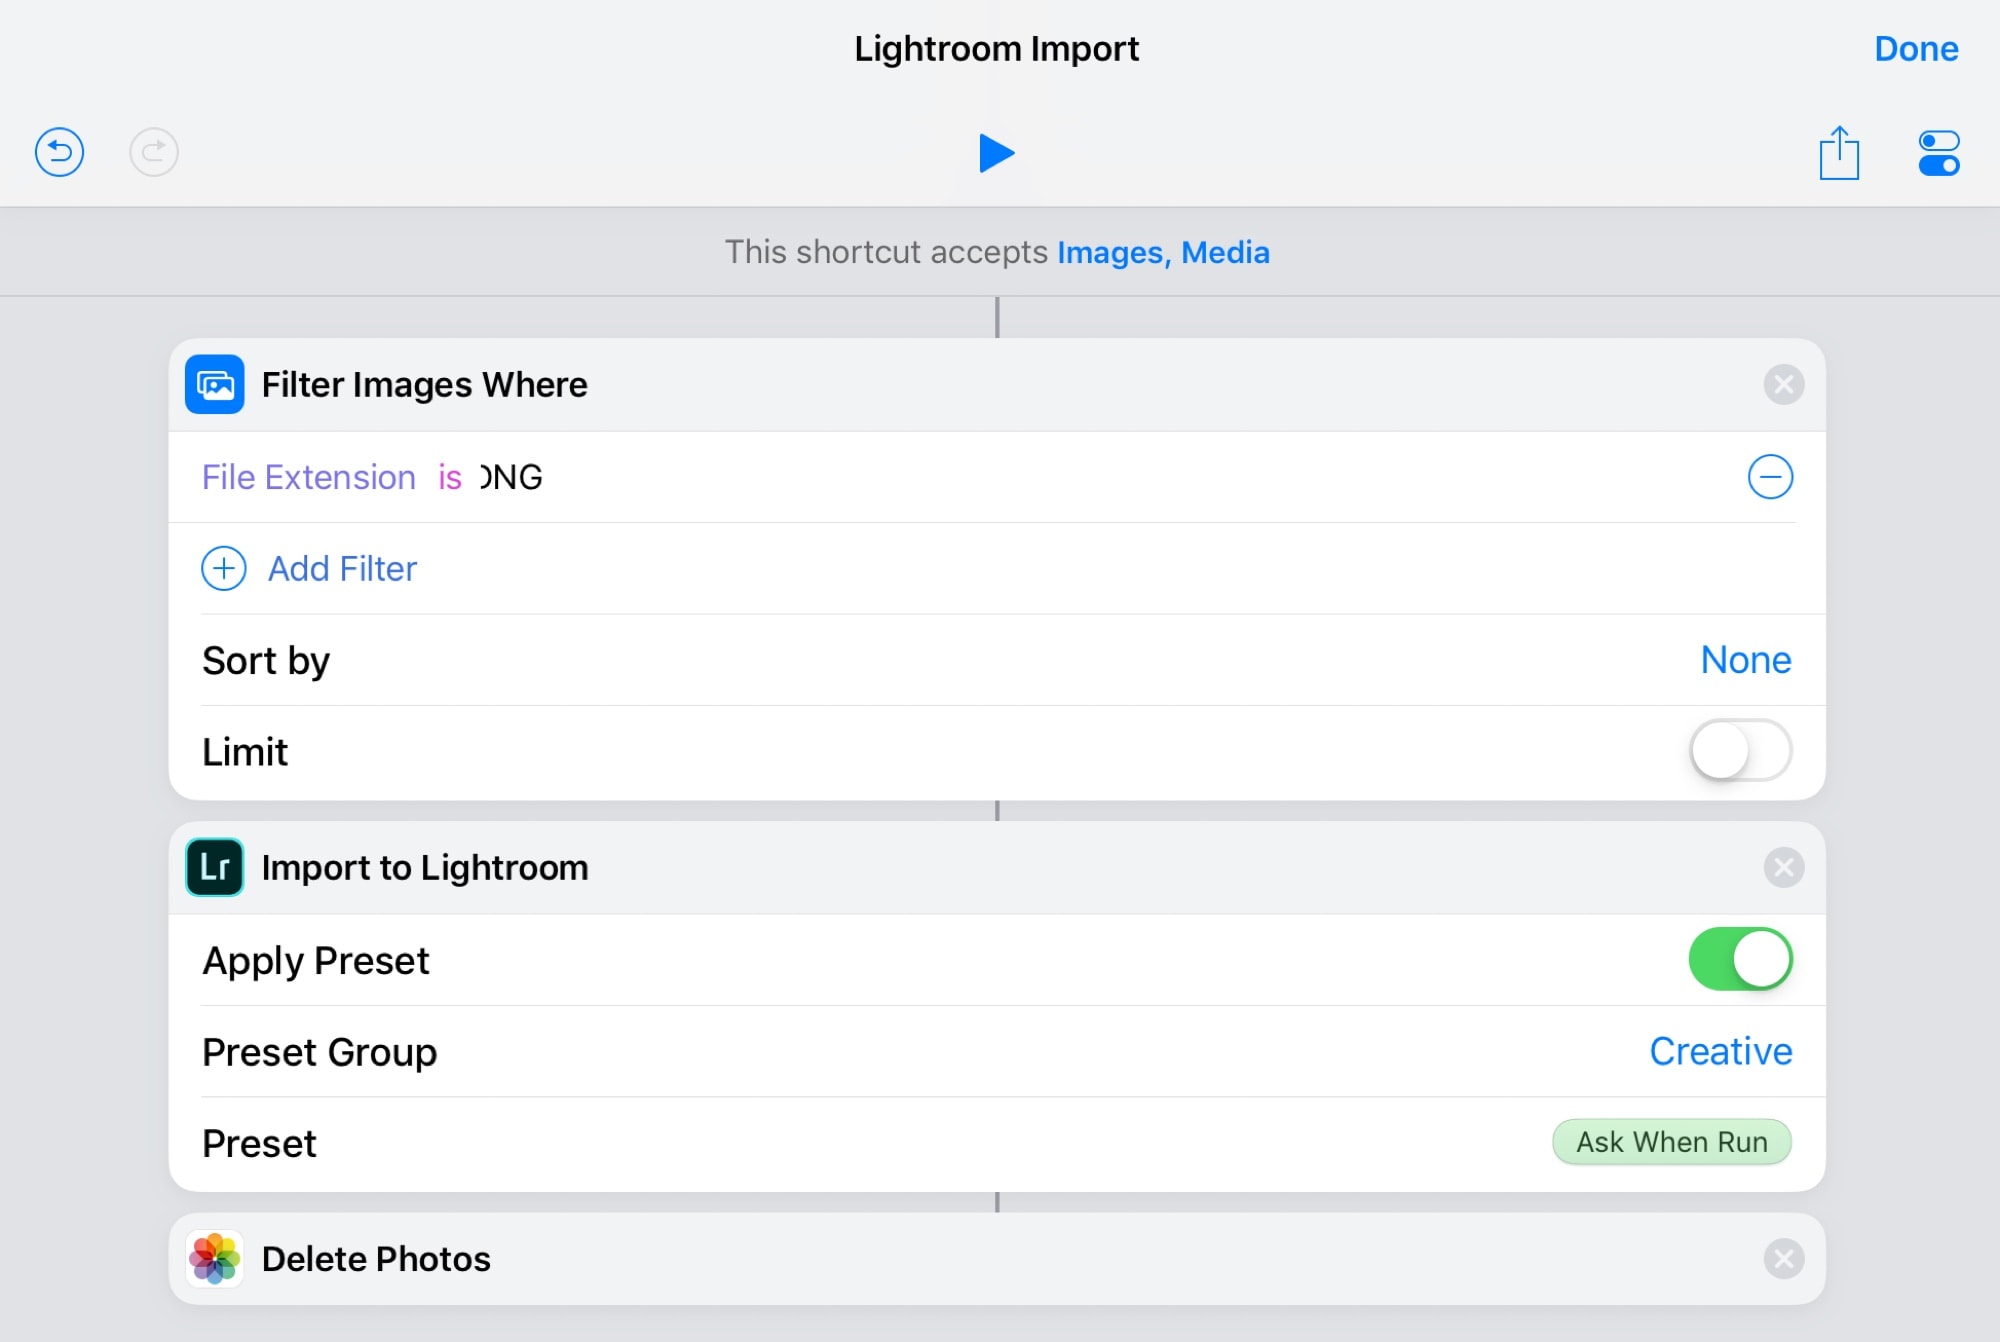 Lightroom’s Shortcut lets you work around iOS limitations.